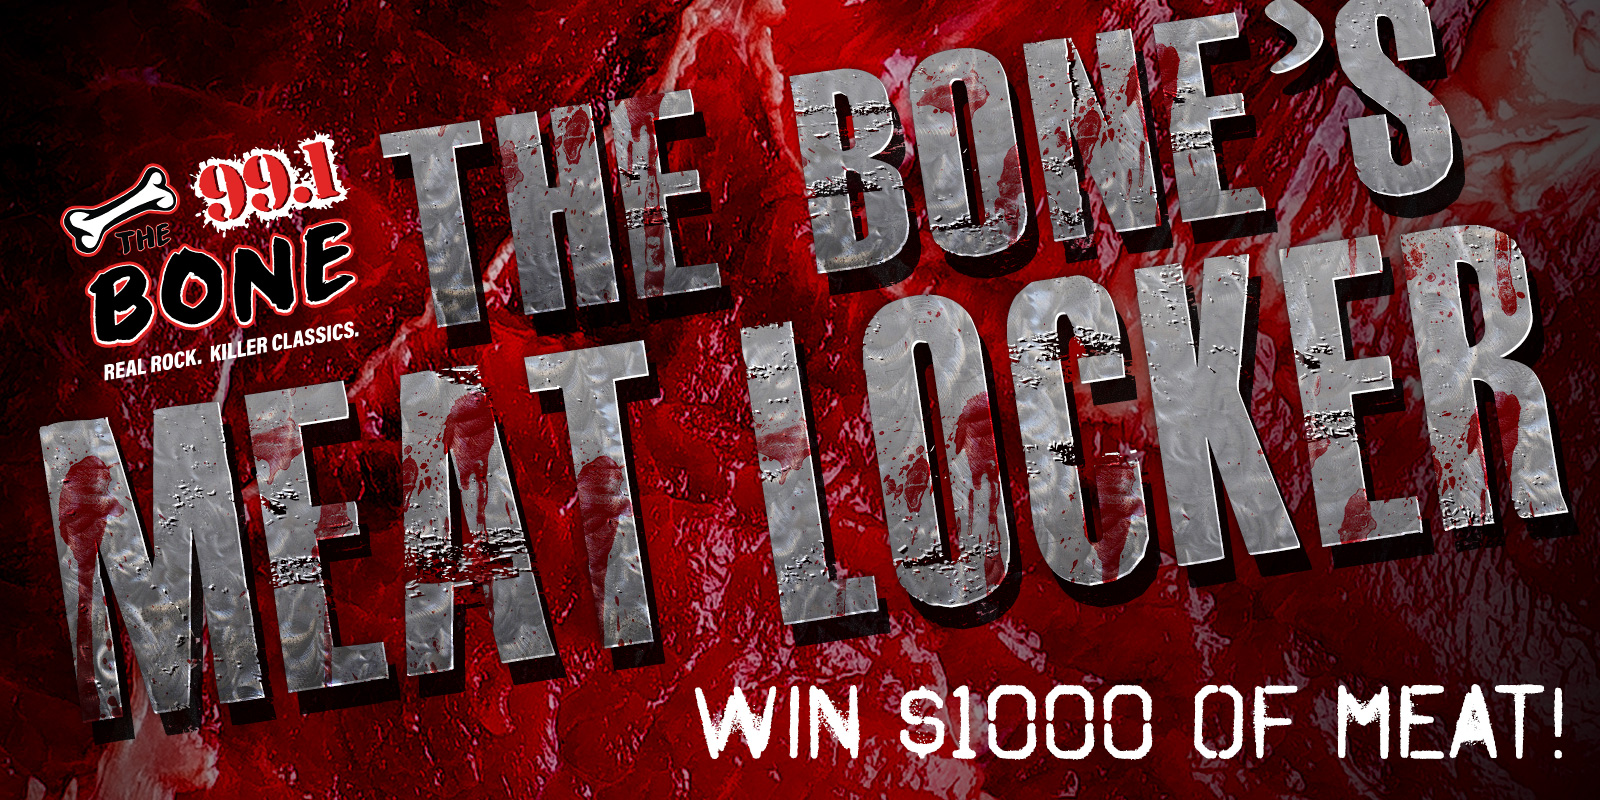 The Bone’s $1,000 Meat Locker – Enter the Keywords And Win BIG